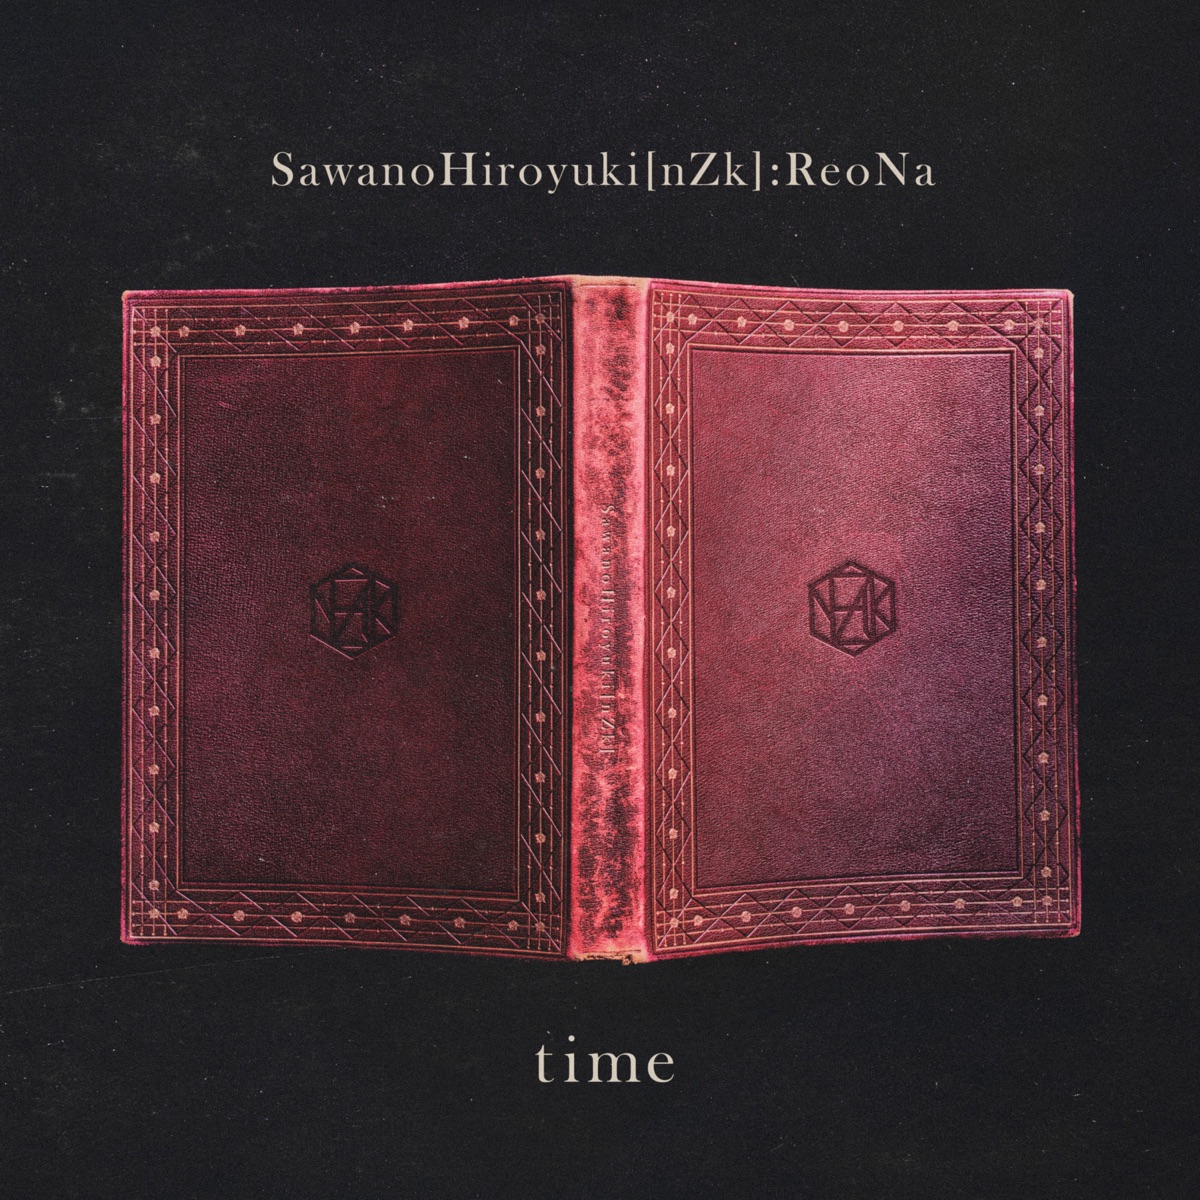 Cover art for『SawanoHiroyuki[nZk]:ReoNa - time』from the release『time